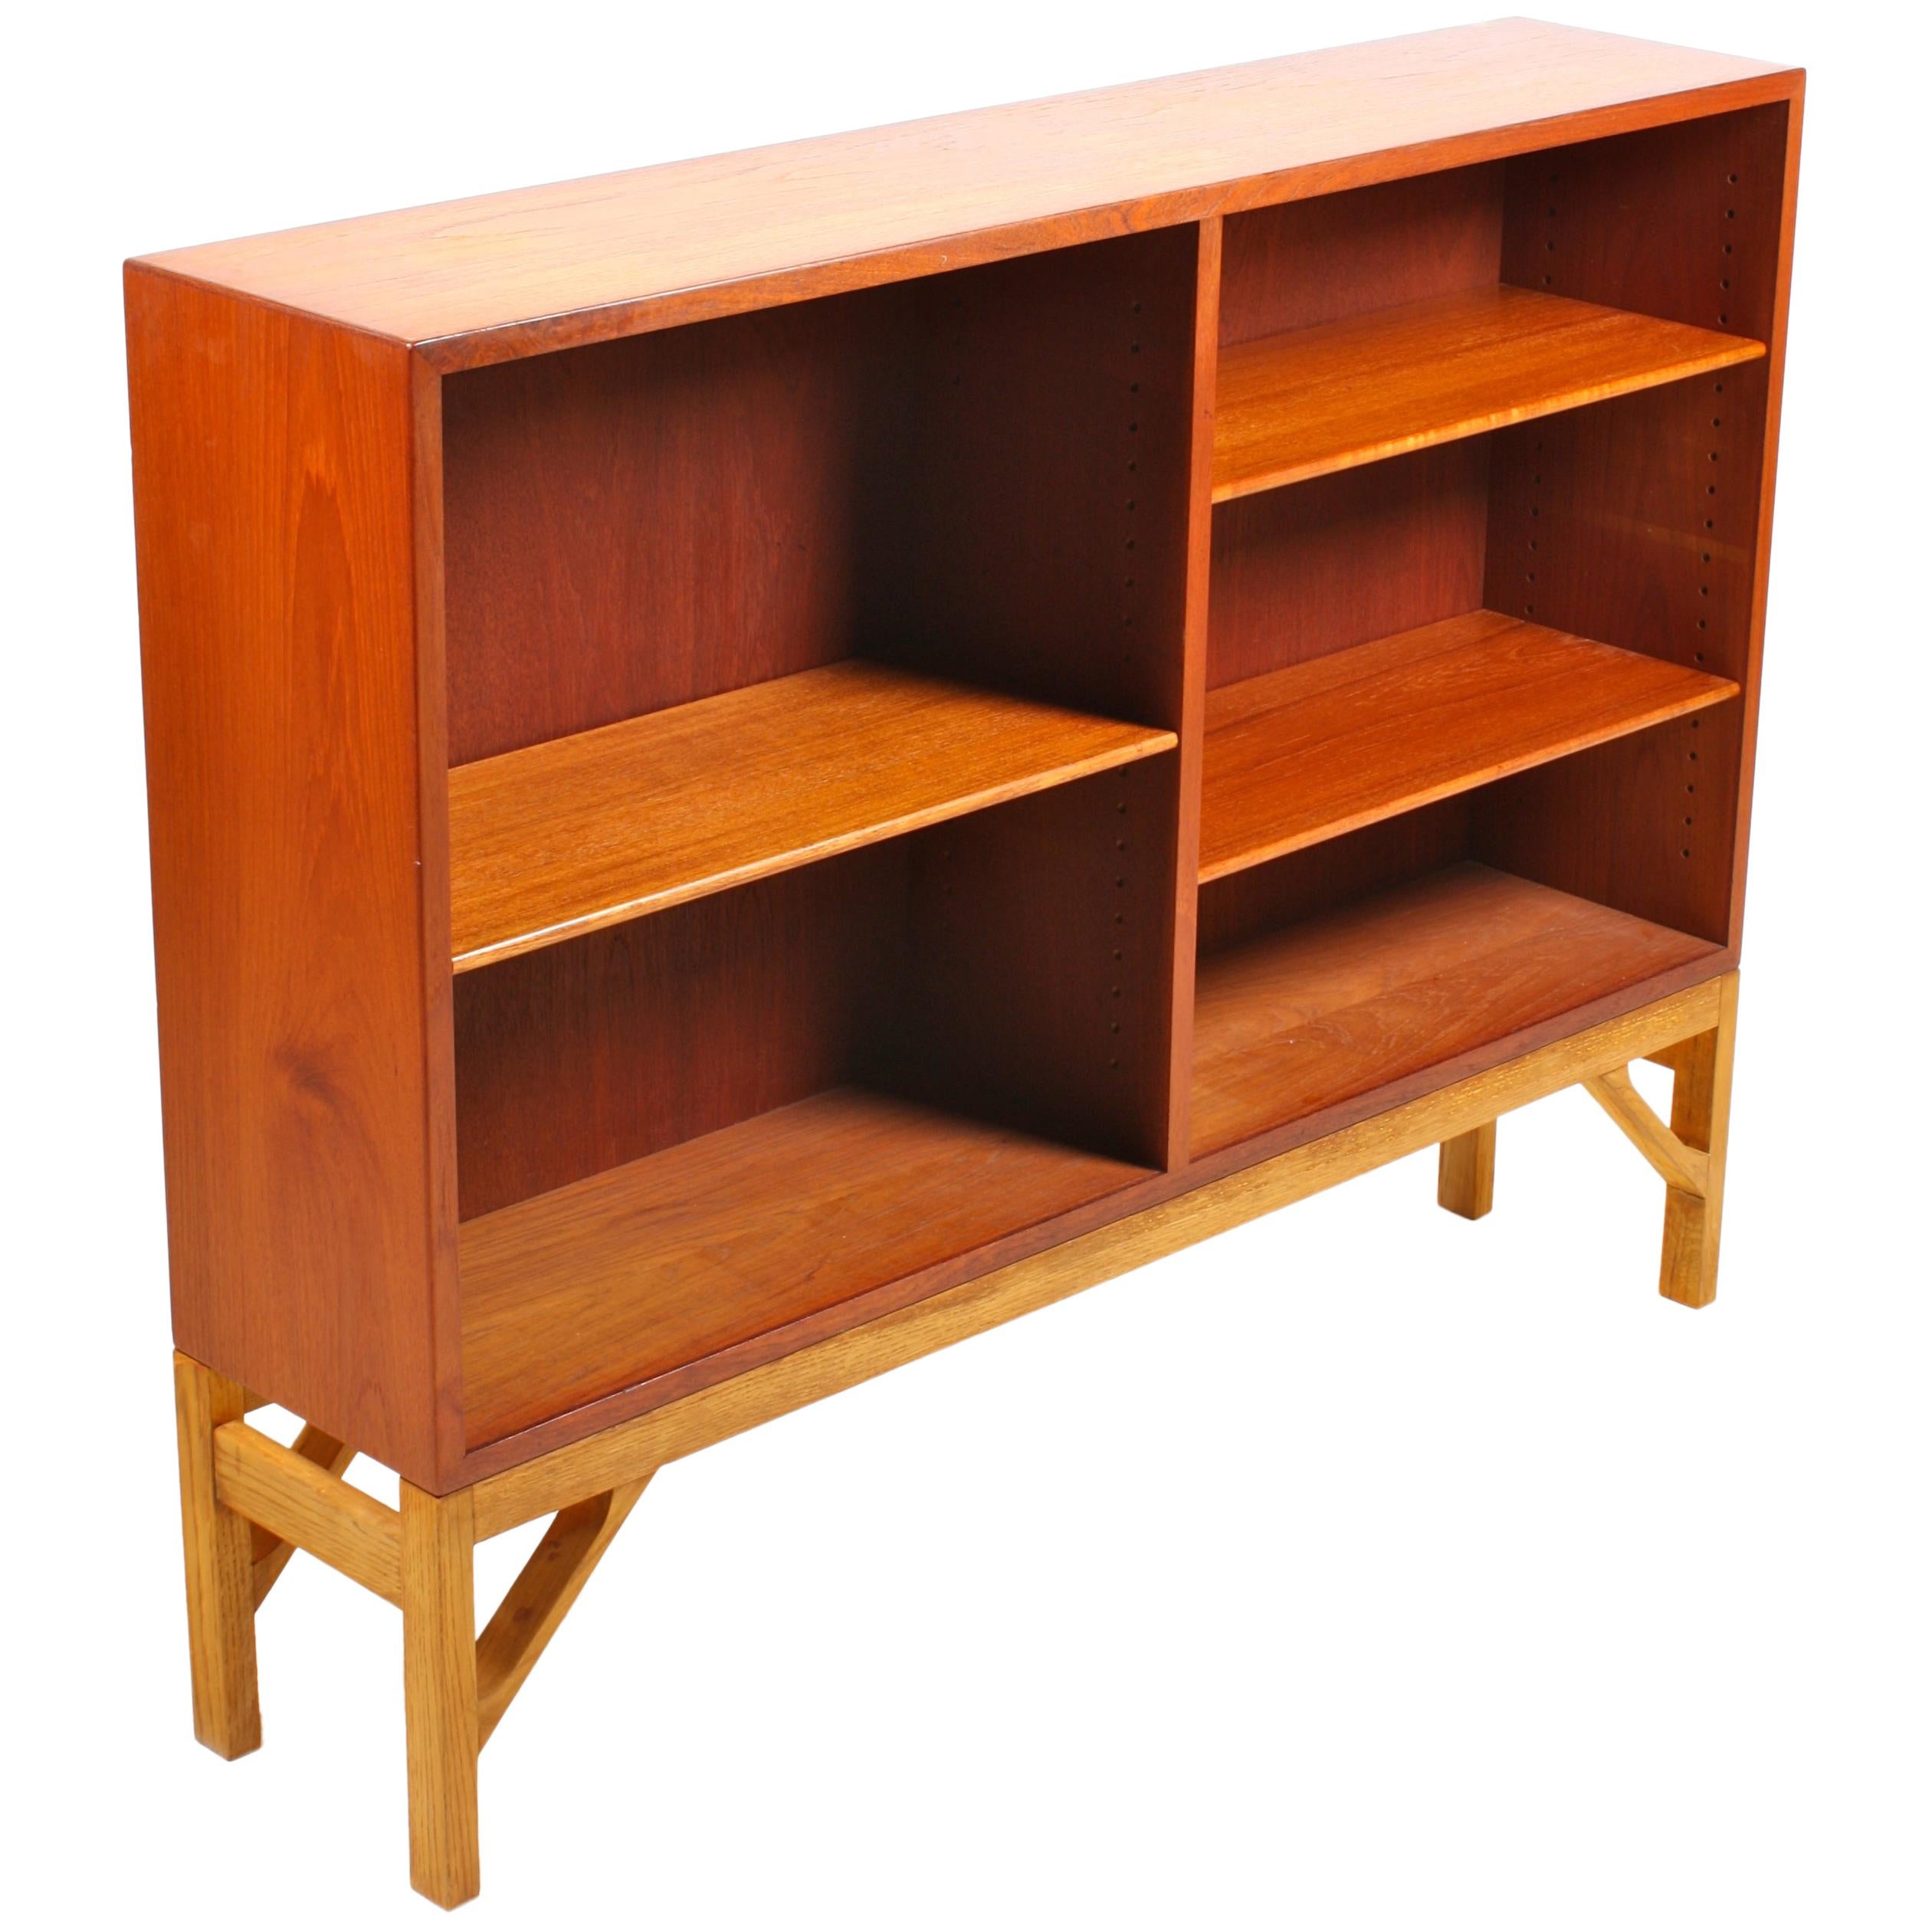 Midcentury "China" Bookcase in Teak and Oak by Børge Mogensen, 1960s